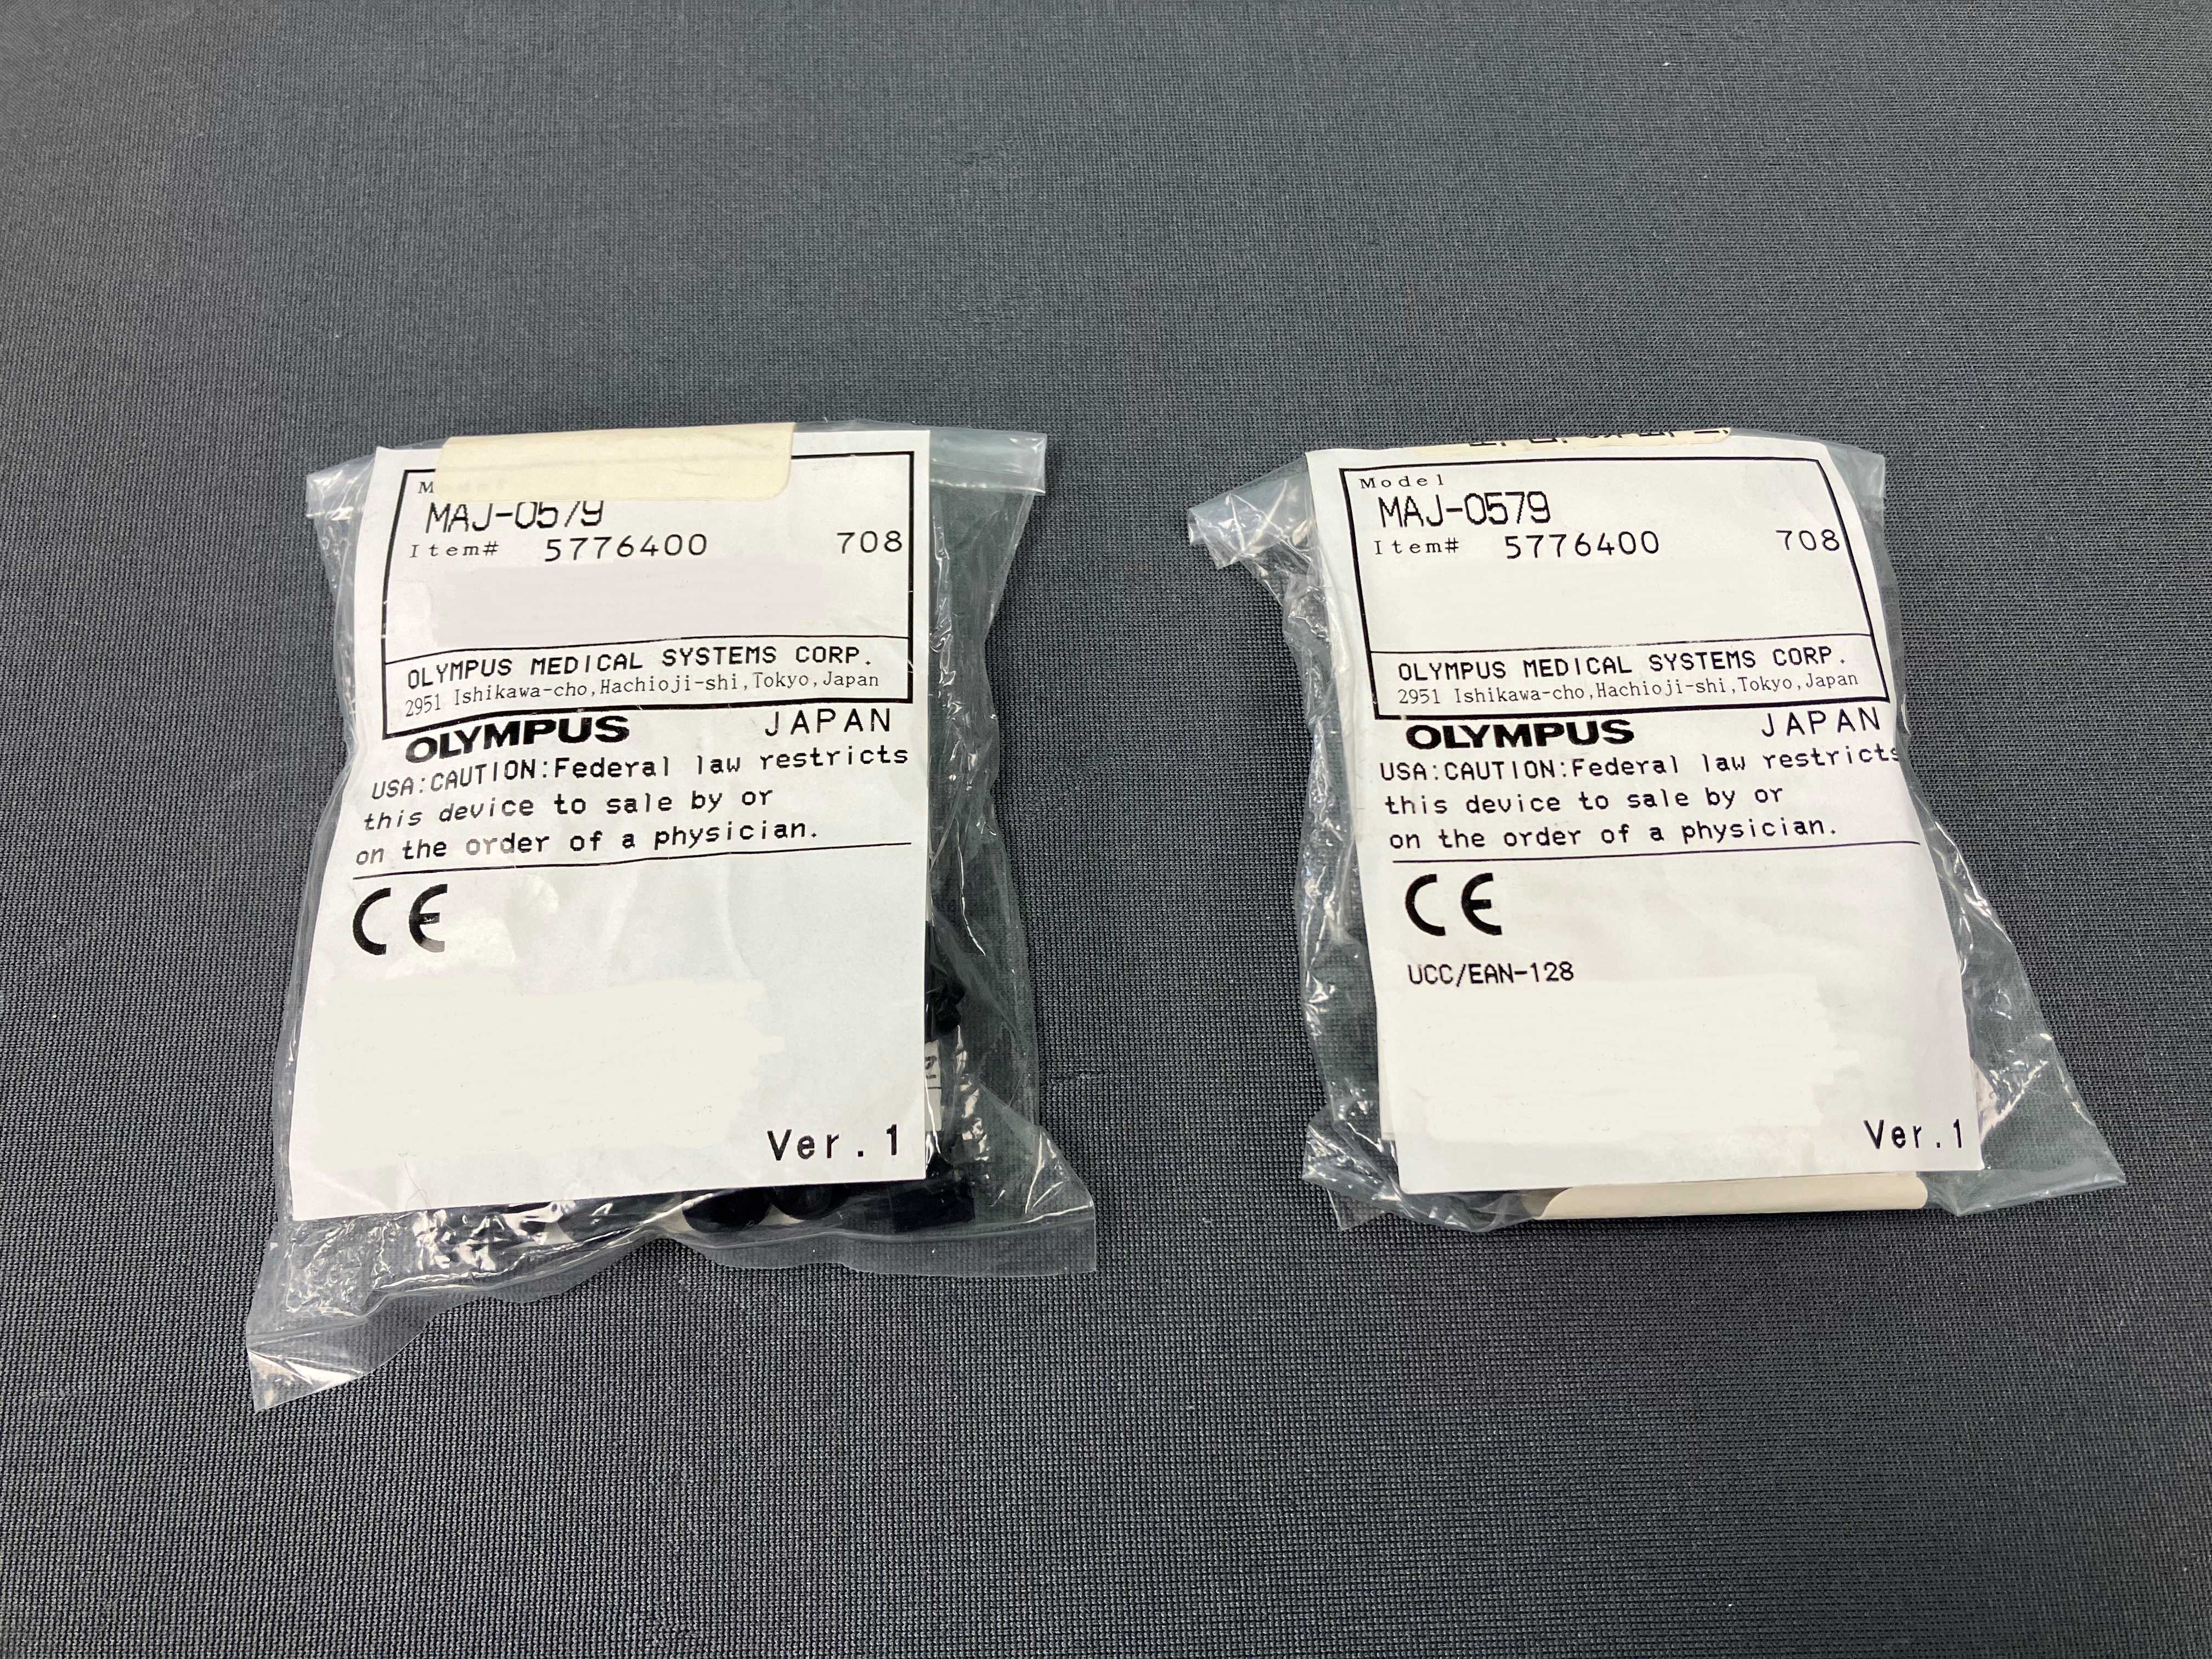 Olympus MAJ-0579 Surgical Biopsy Valve - lot of 2 packages of 10 seals